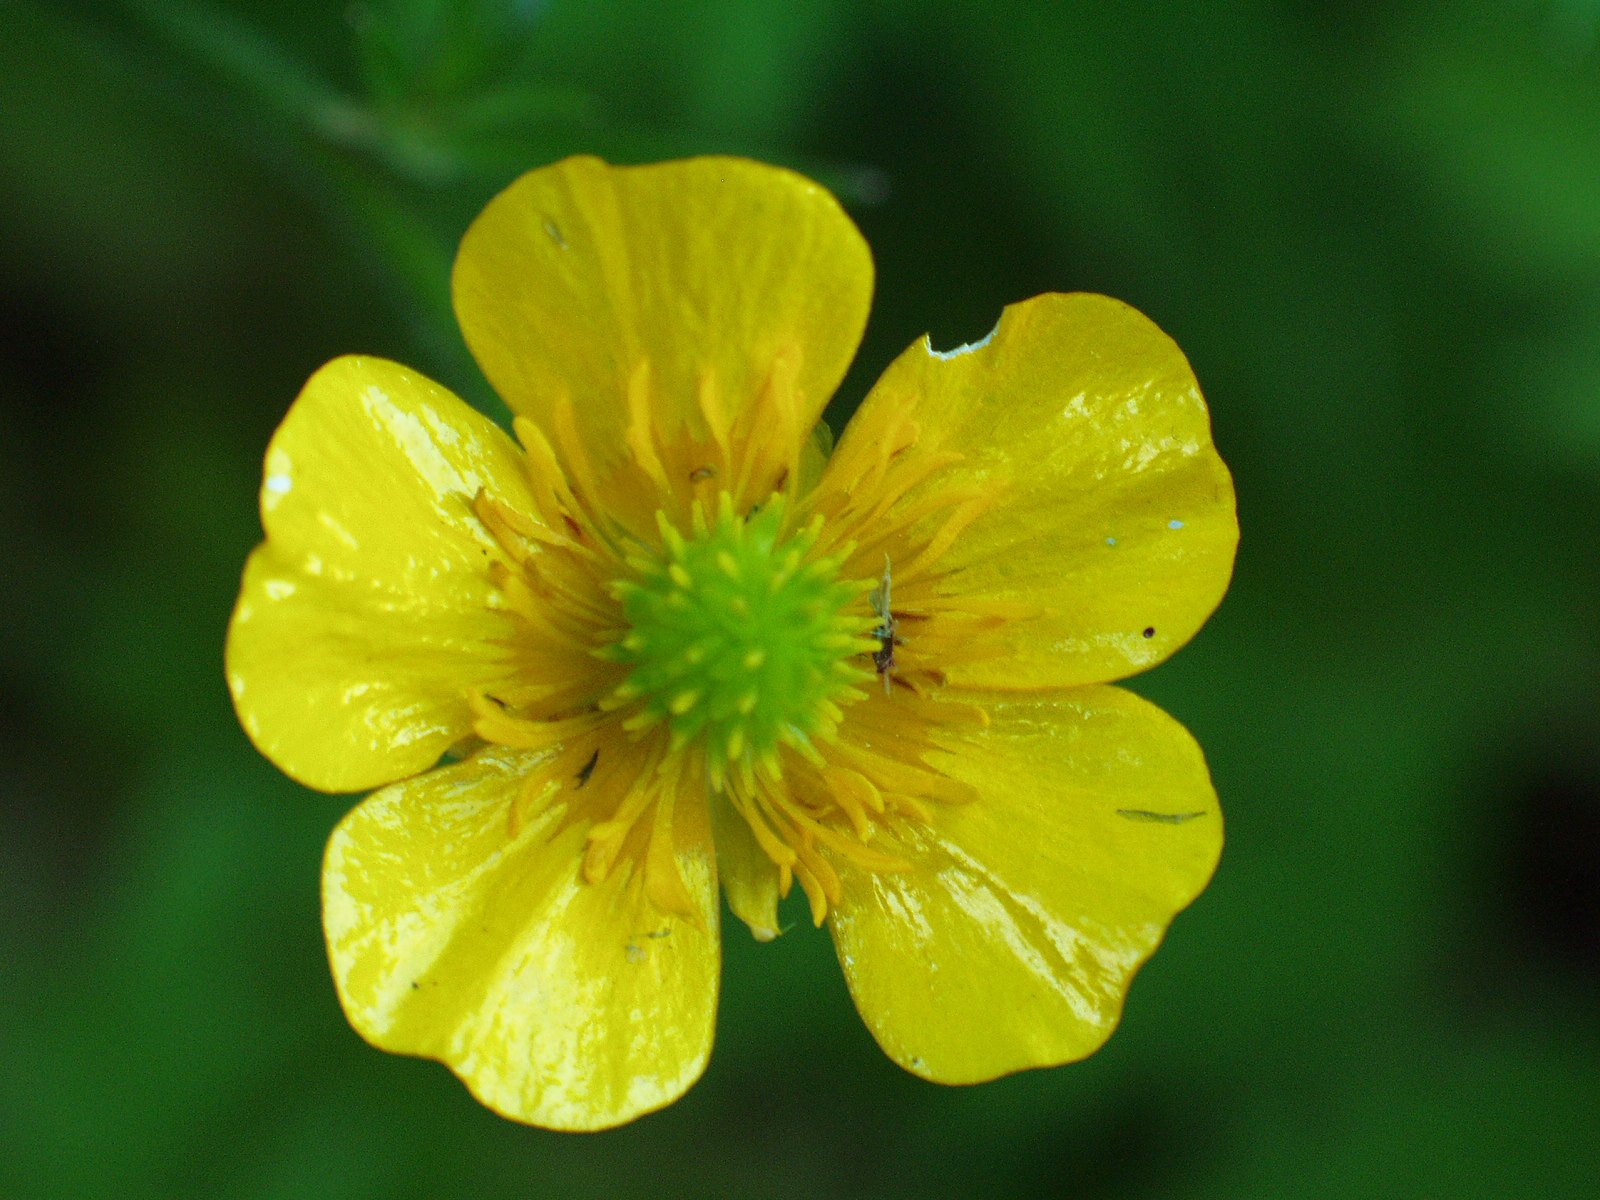 a yellow flower that has dew on it